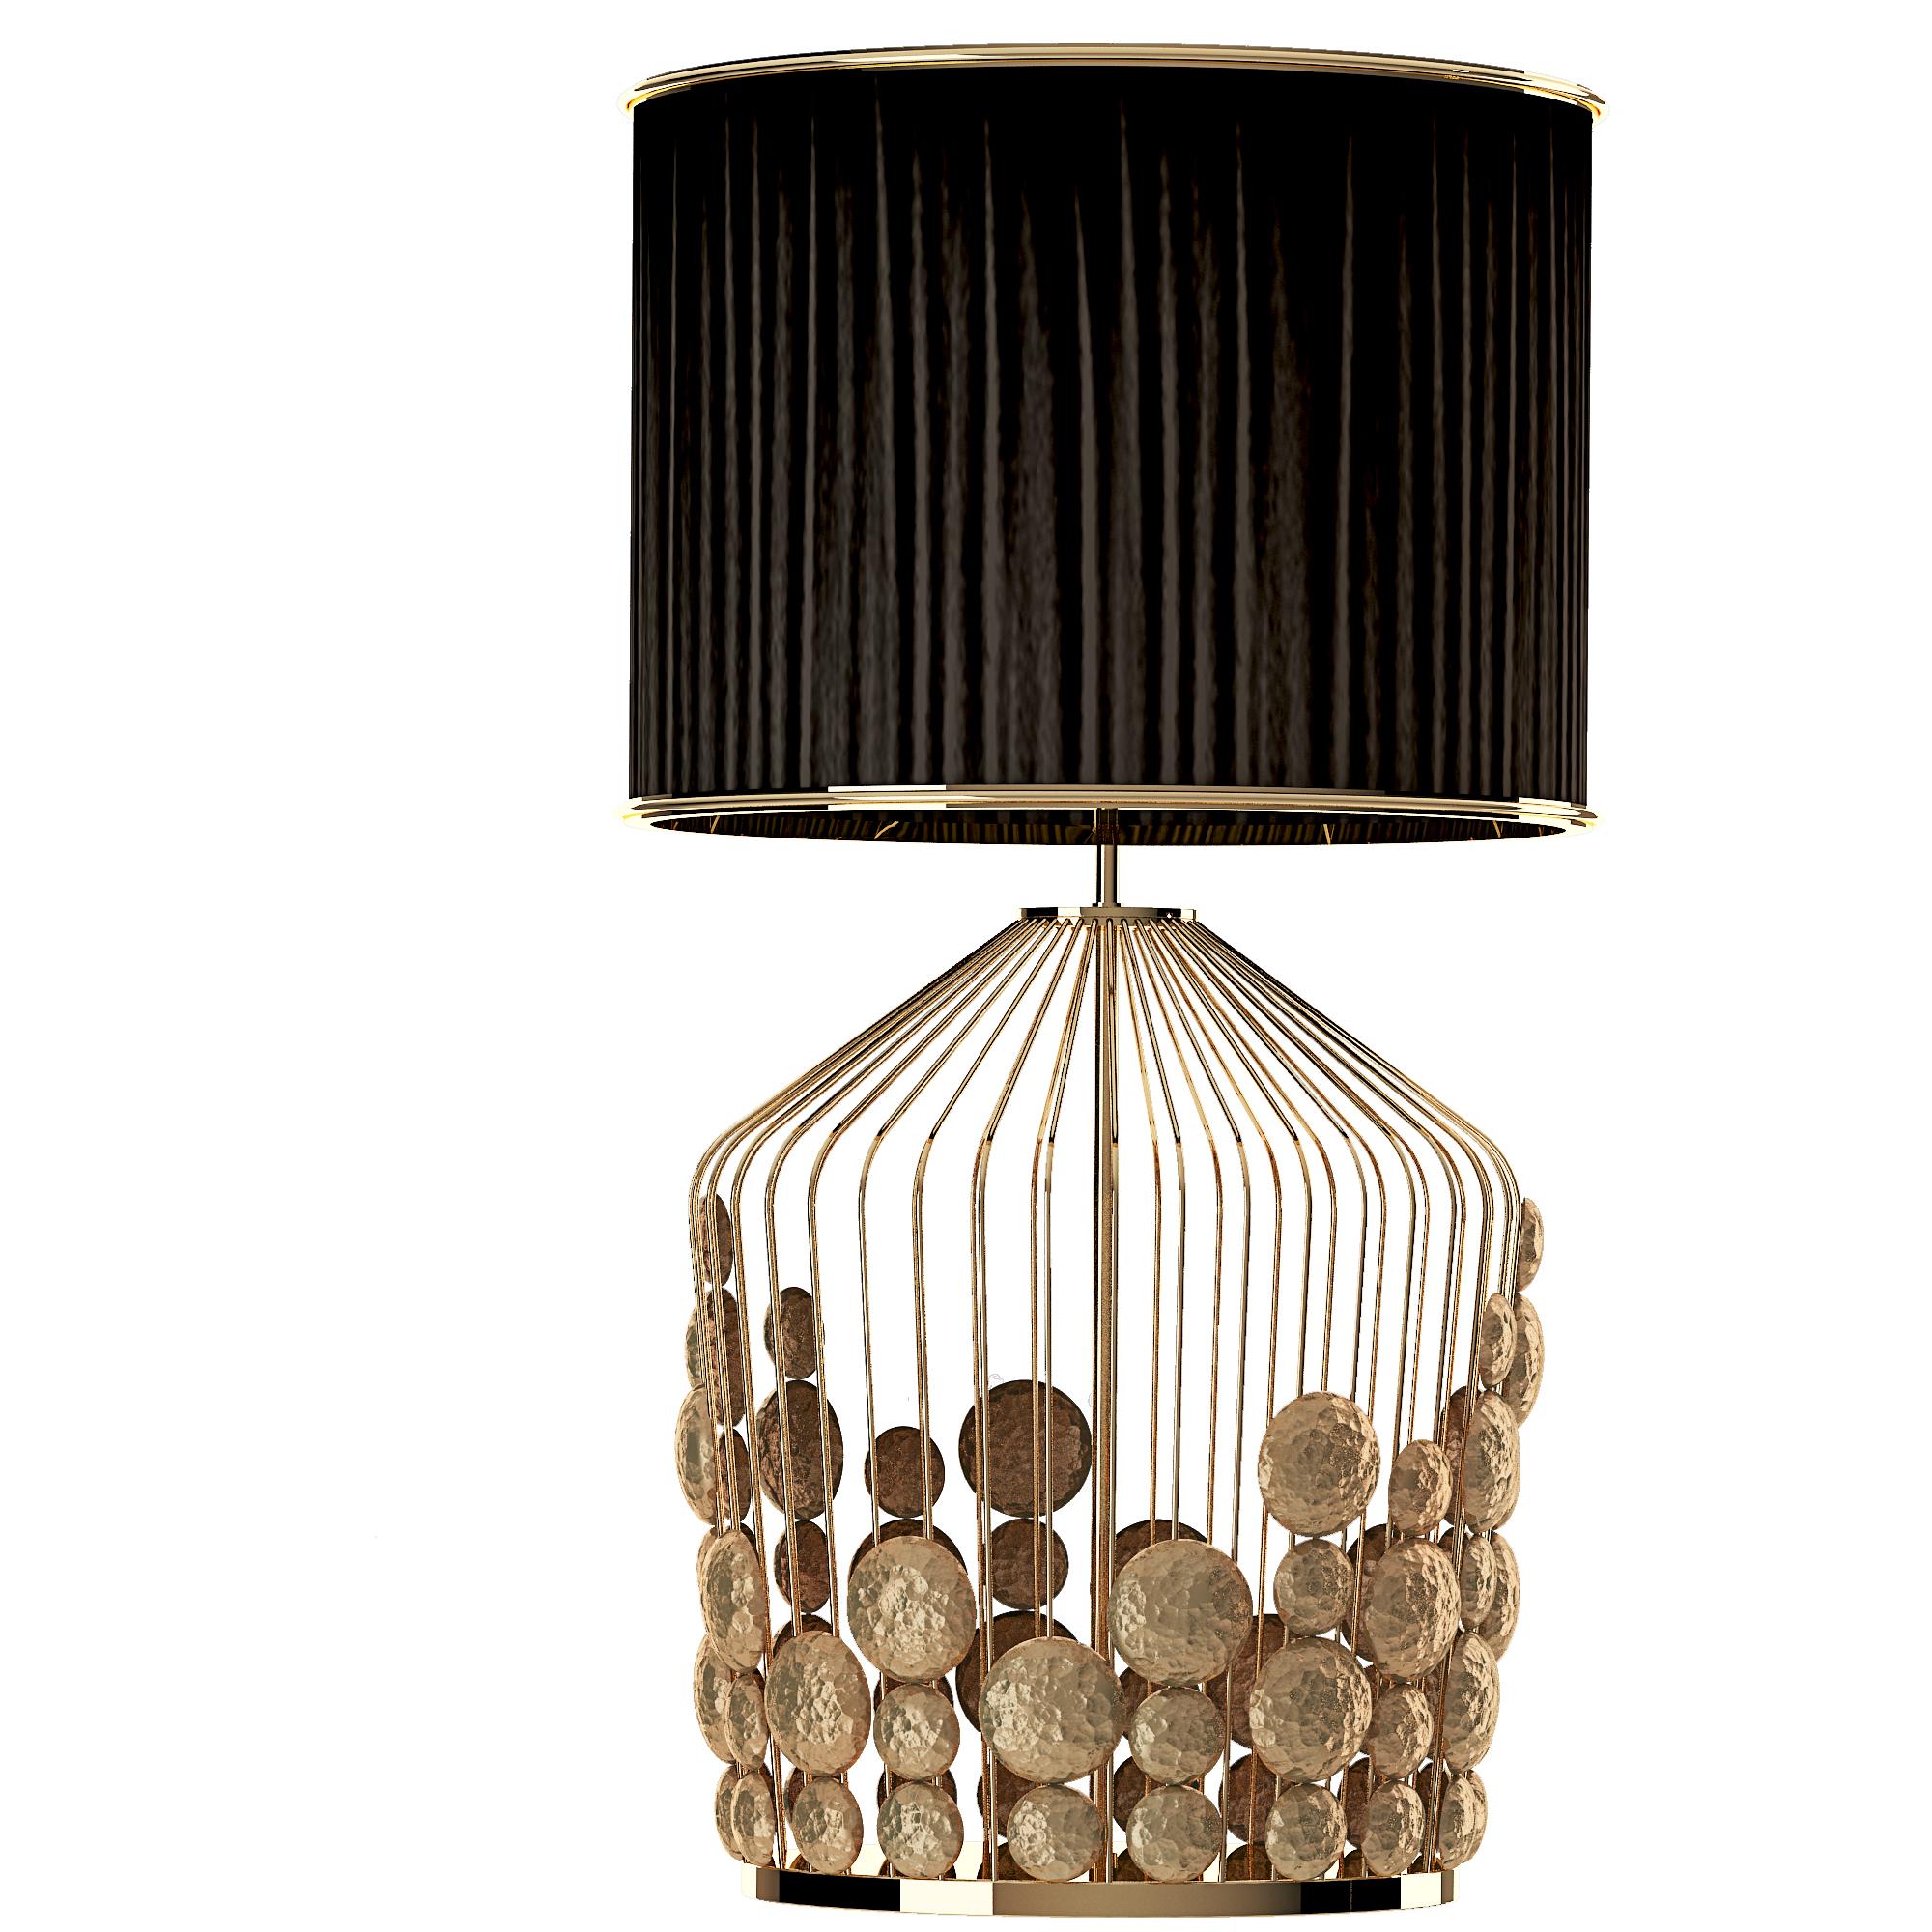 Grapes modern lamp is a nature inspired contemporary lighting piece. Its light flows through the organza silk shade, reflecting off the hammered gold-plated brass medallions and bringing the same sense of refined luxury as if you were opening a